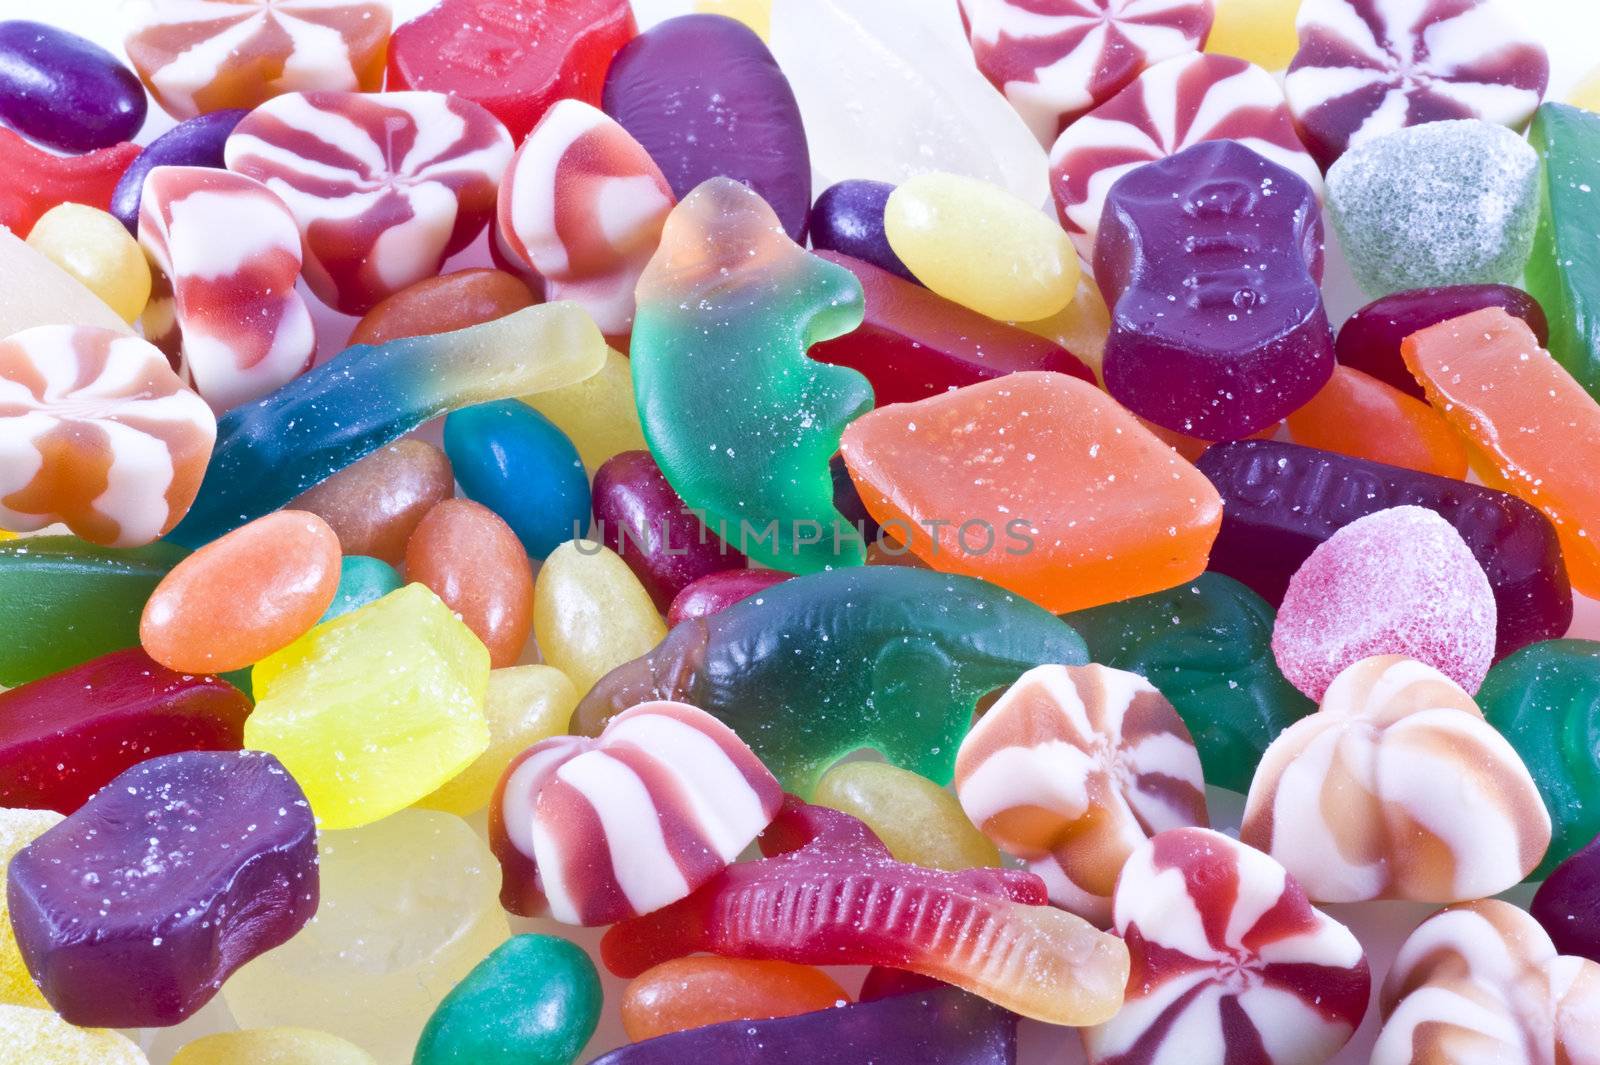 Close up of different kinds of colorful candy.